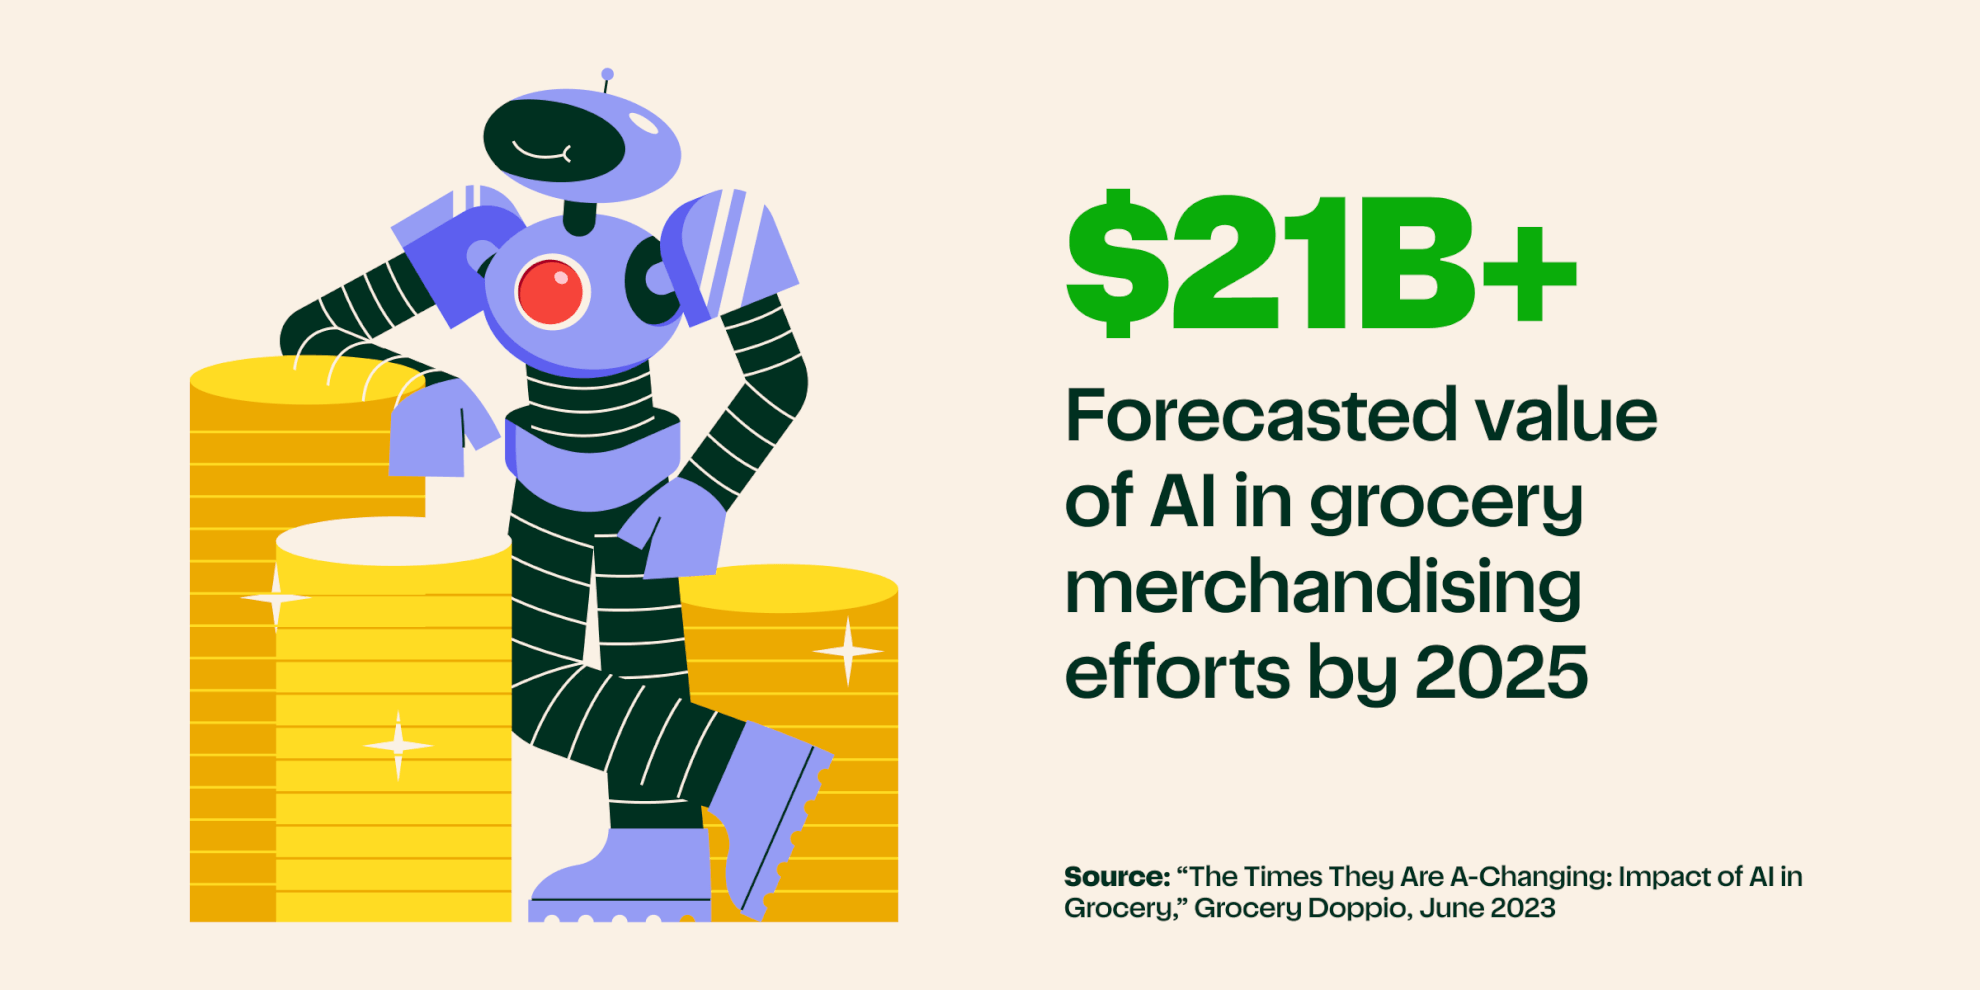 $21B+ Forecasted value of AI in grocery merchandising efforts by 2025